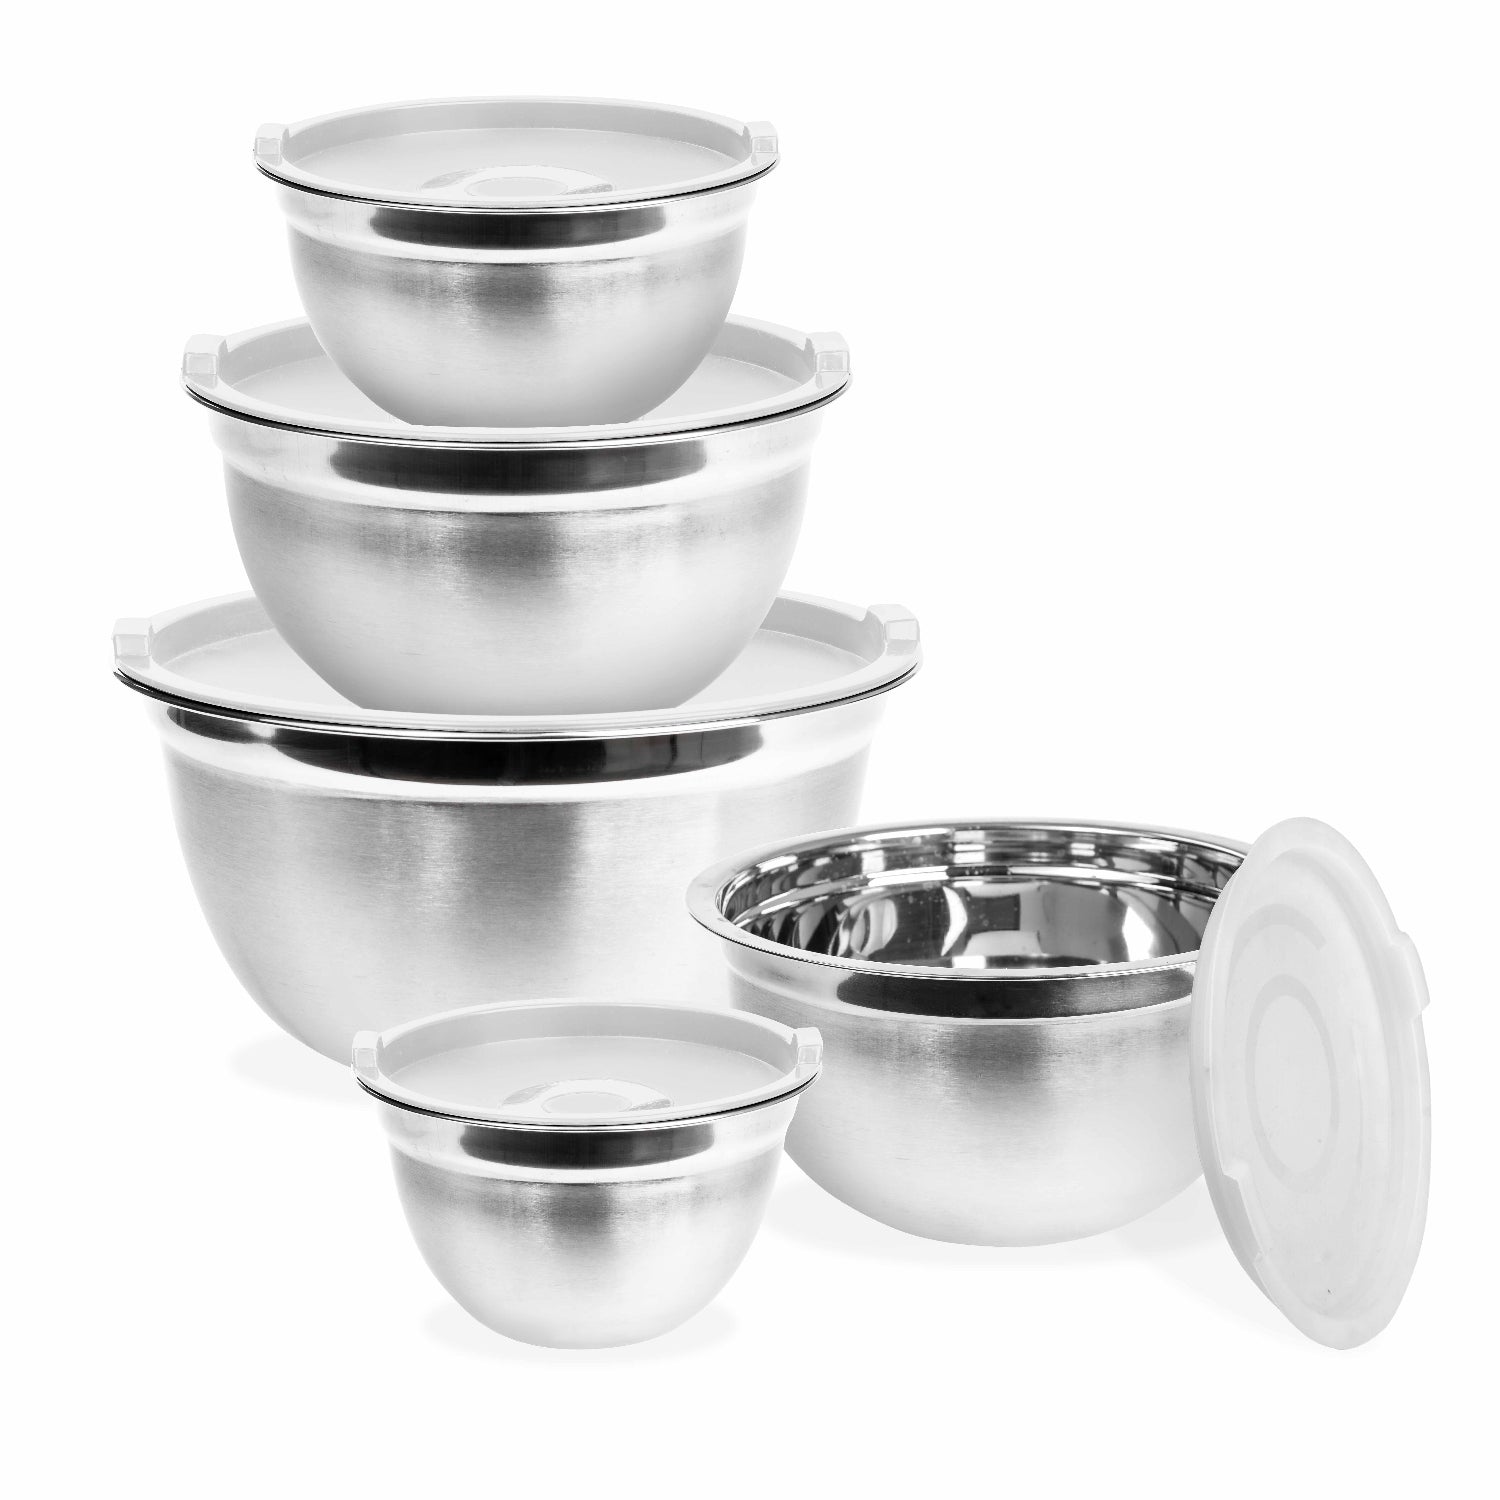 (Set of 4) Stainless Steel Mixing Bowl Set by Tezzorio, 5-8-13-16 Quart Polished Mirror Finish Nesting Flat Base Bowls